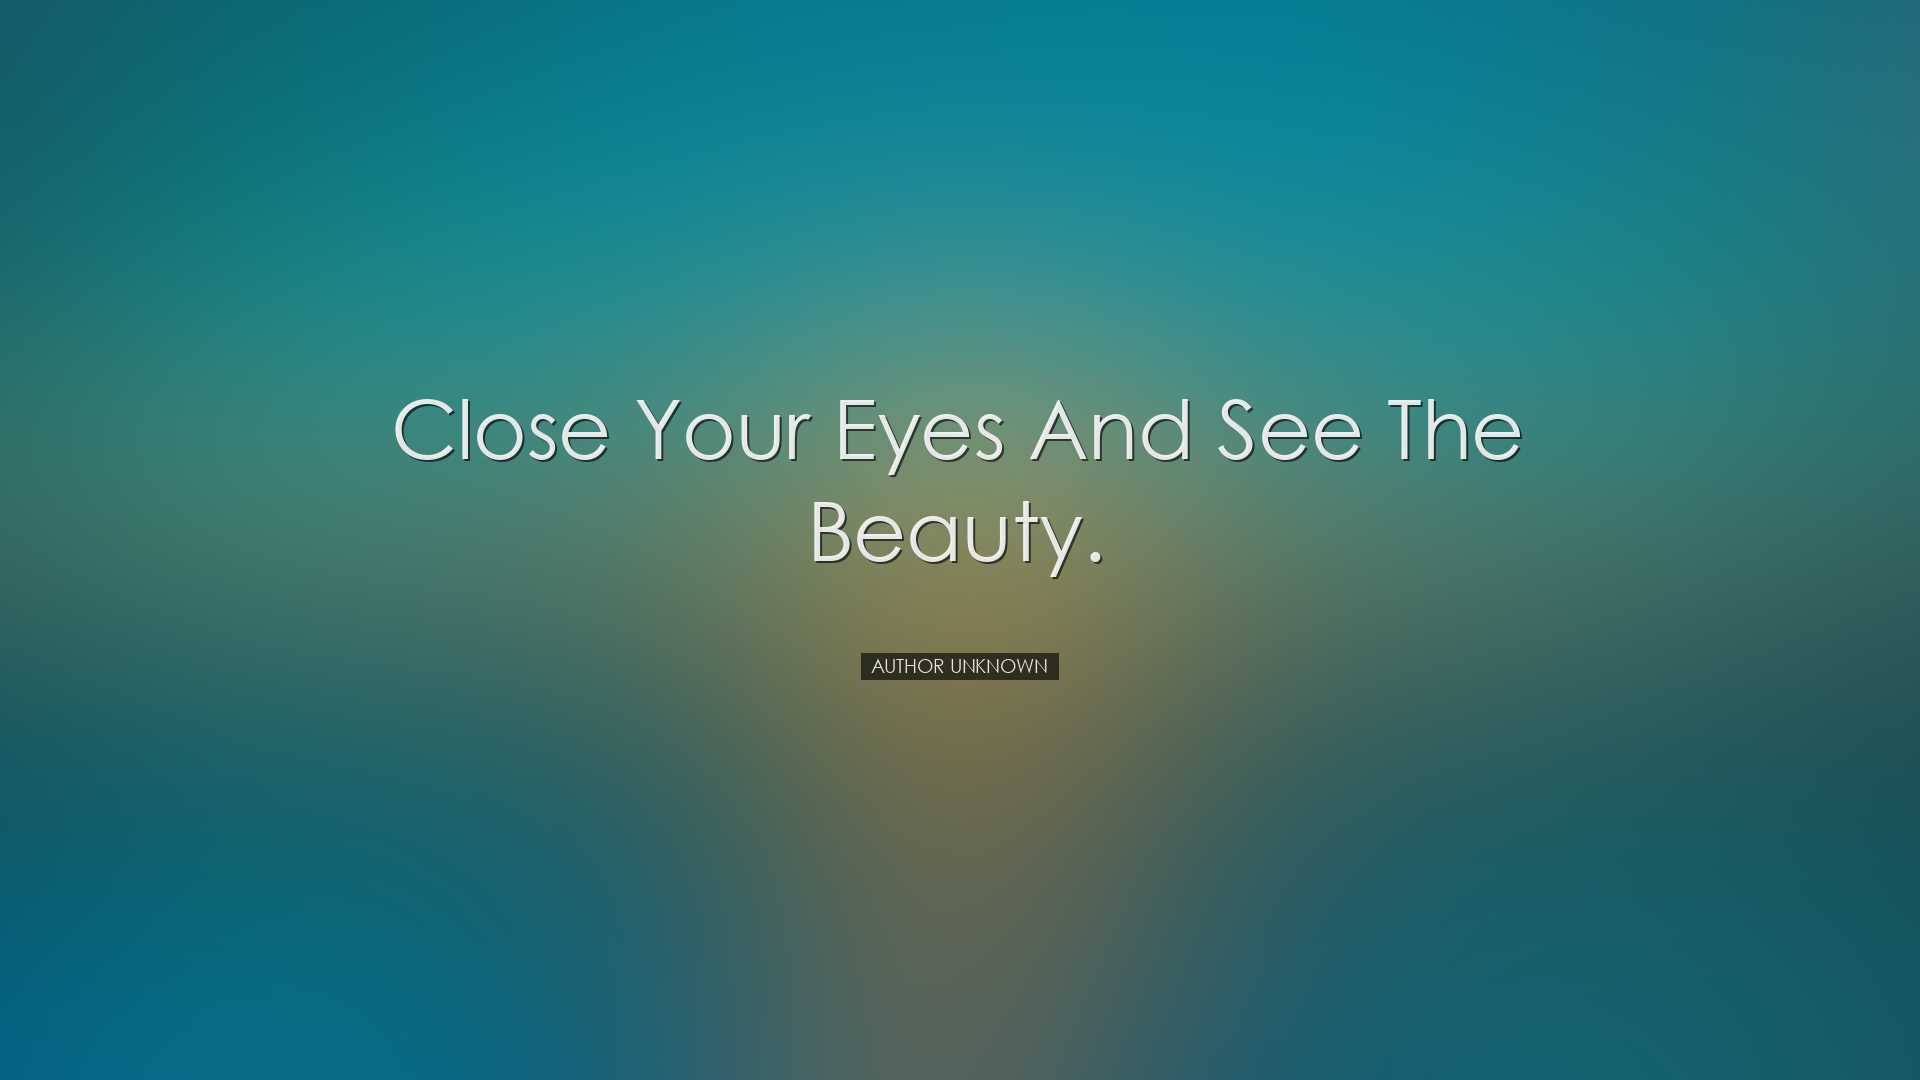 Close your eyes and see the beauty. - Author Unknown